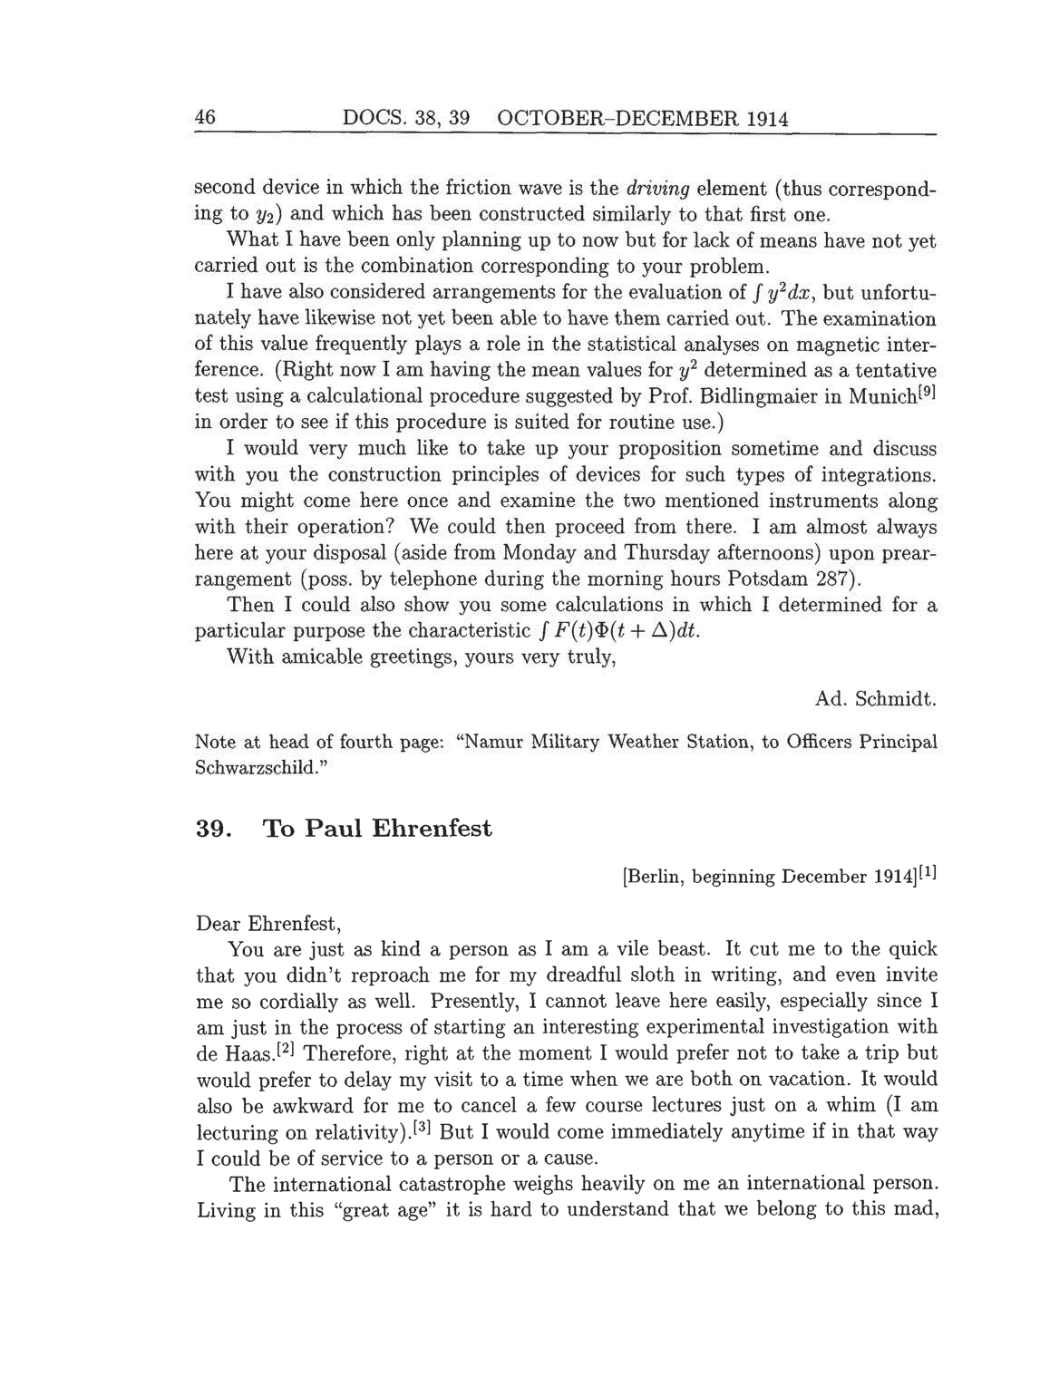 Volume 8: The Berlin Years: Correspondence, 1914-1918 (English translation supplement) page 46